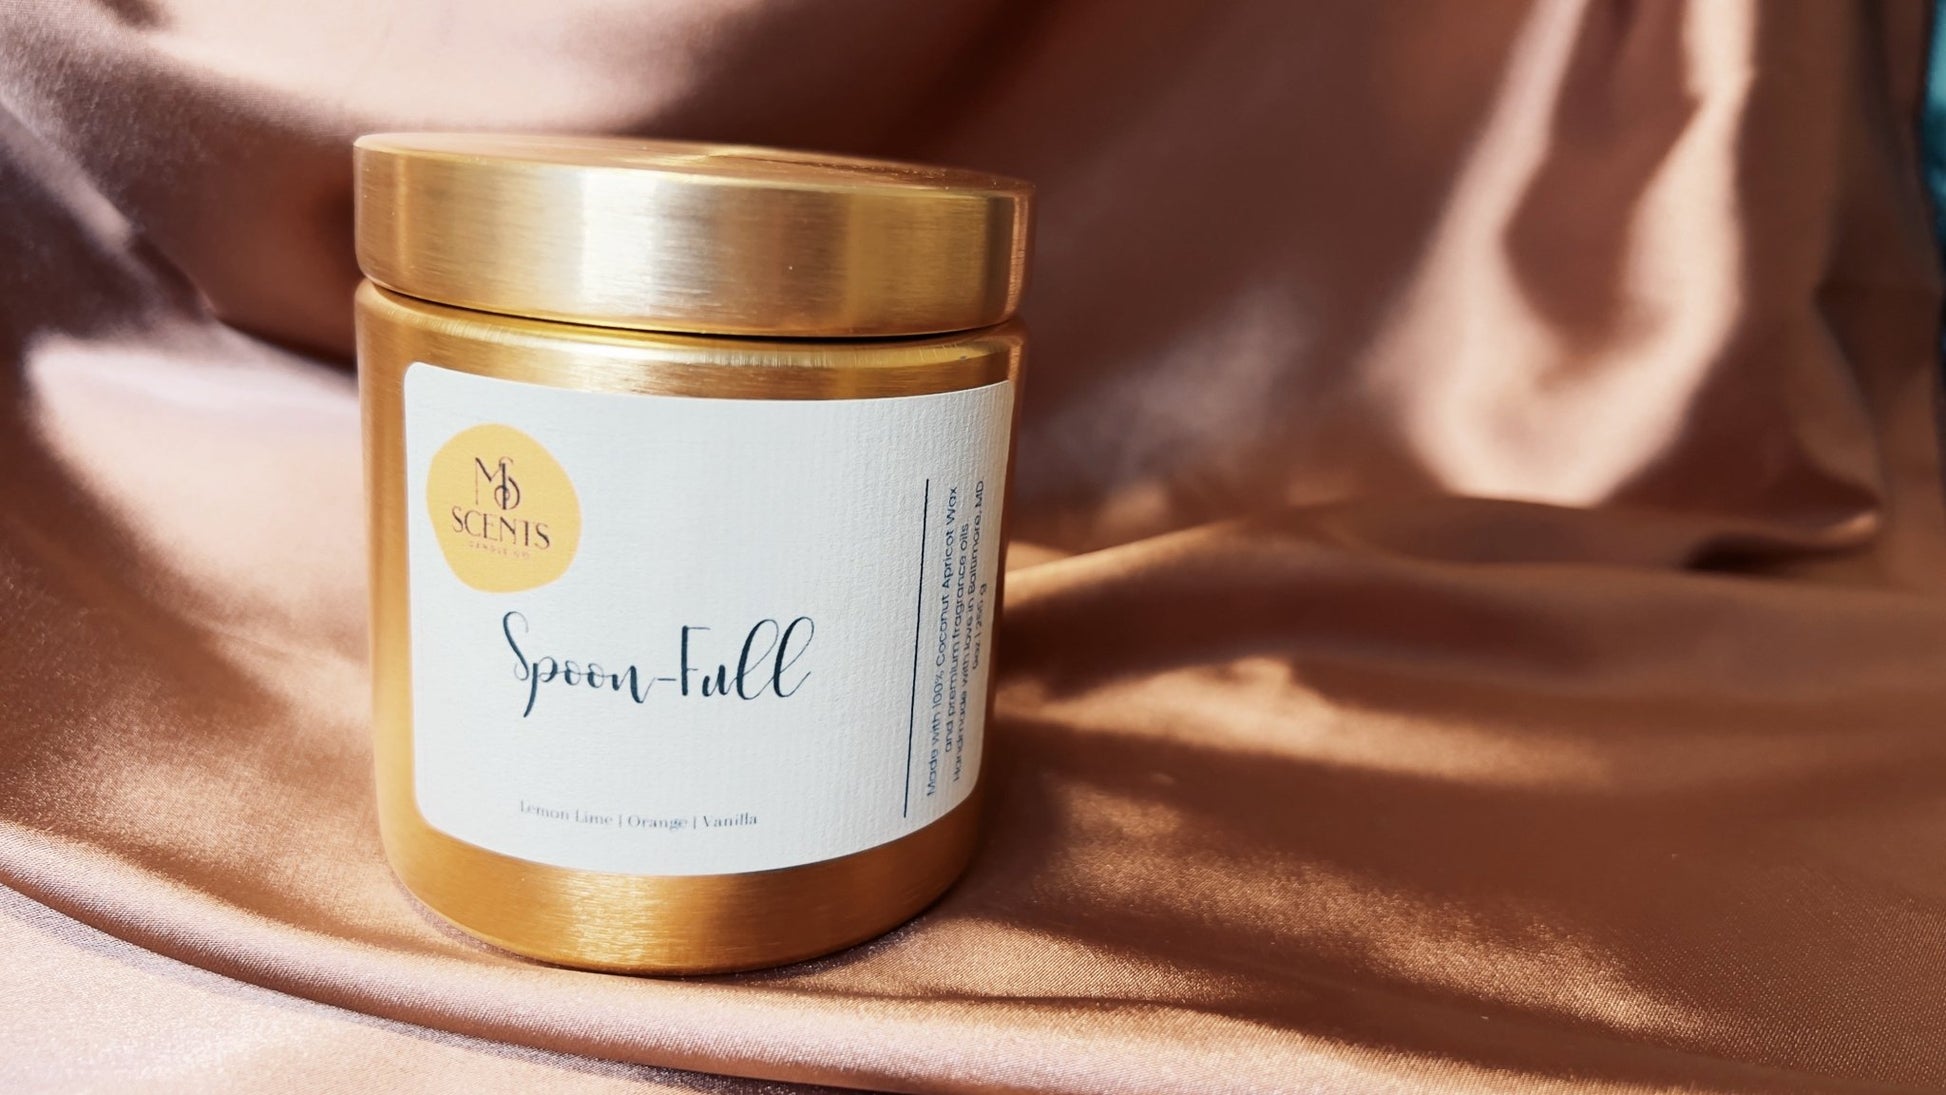 Spoon-Full - MS Scents Candle Co.